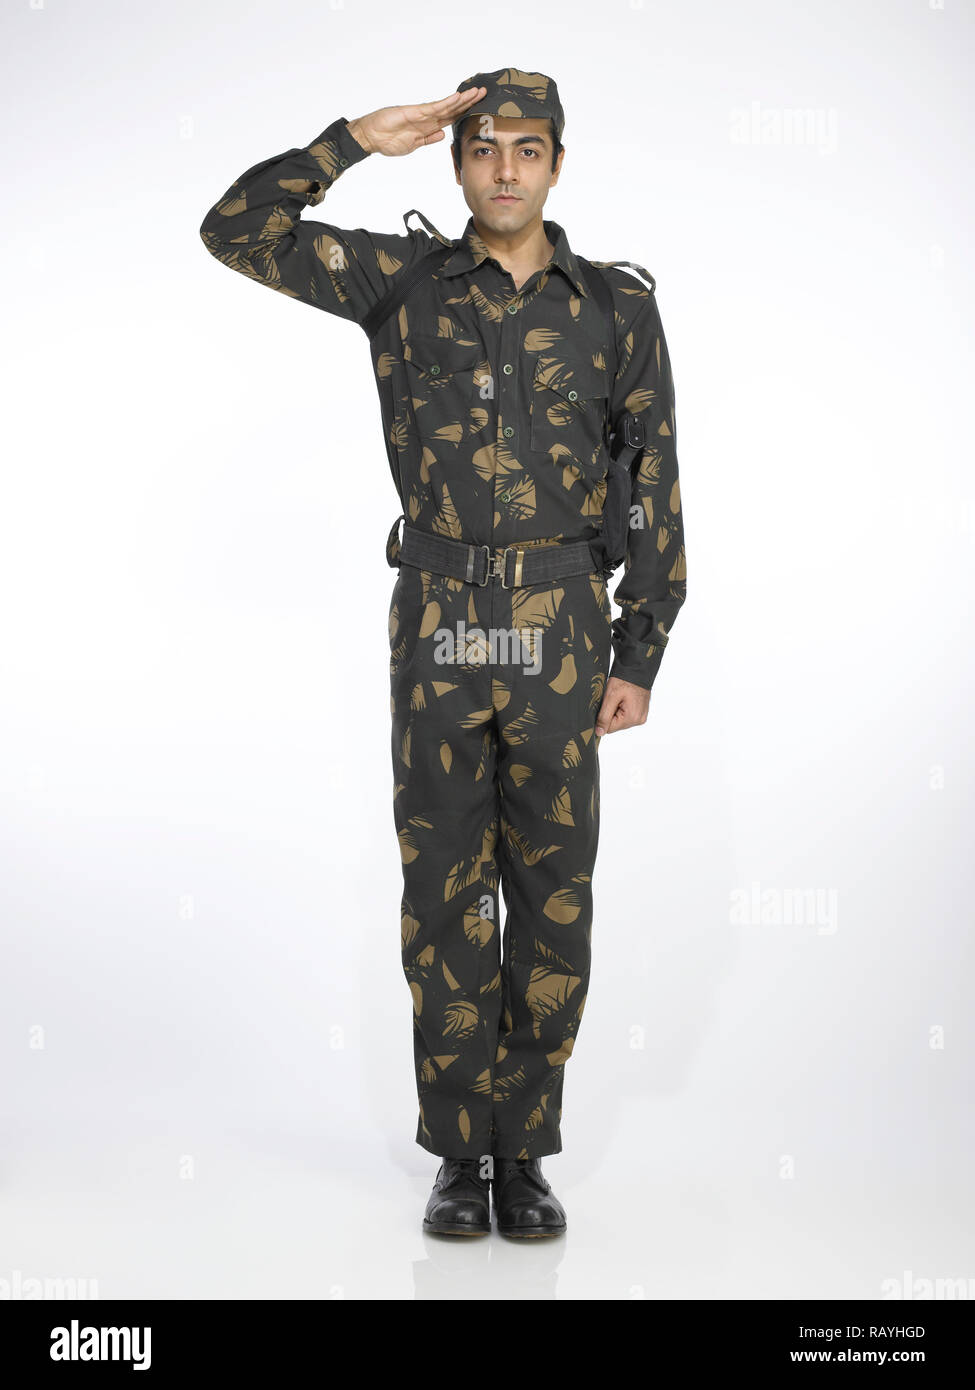 PORTRAIT OF INDIAN SOLDIER DRESSED IN UNIFORM  SALUTING Stock Photo